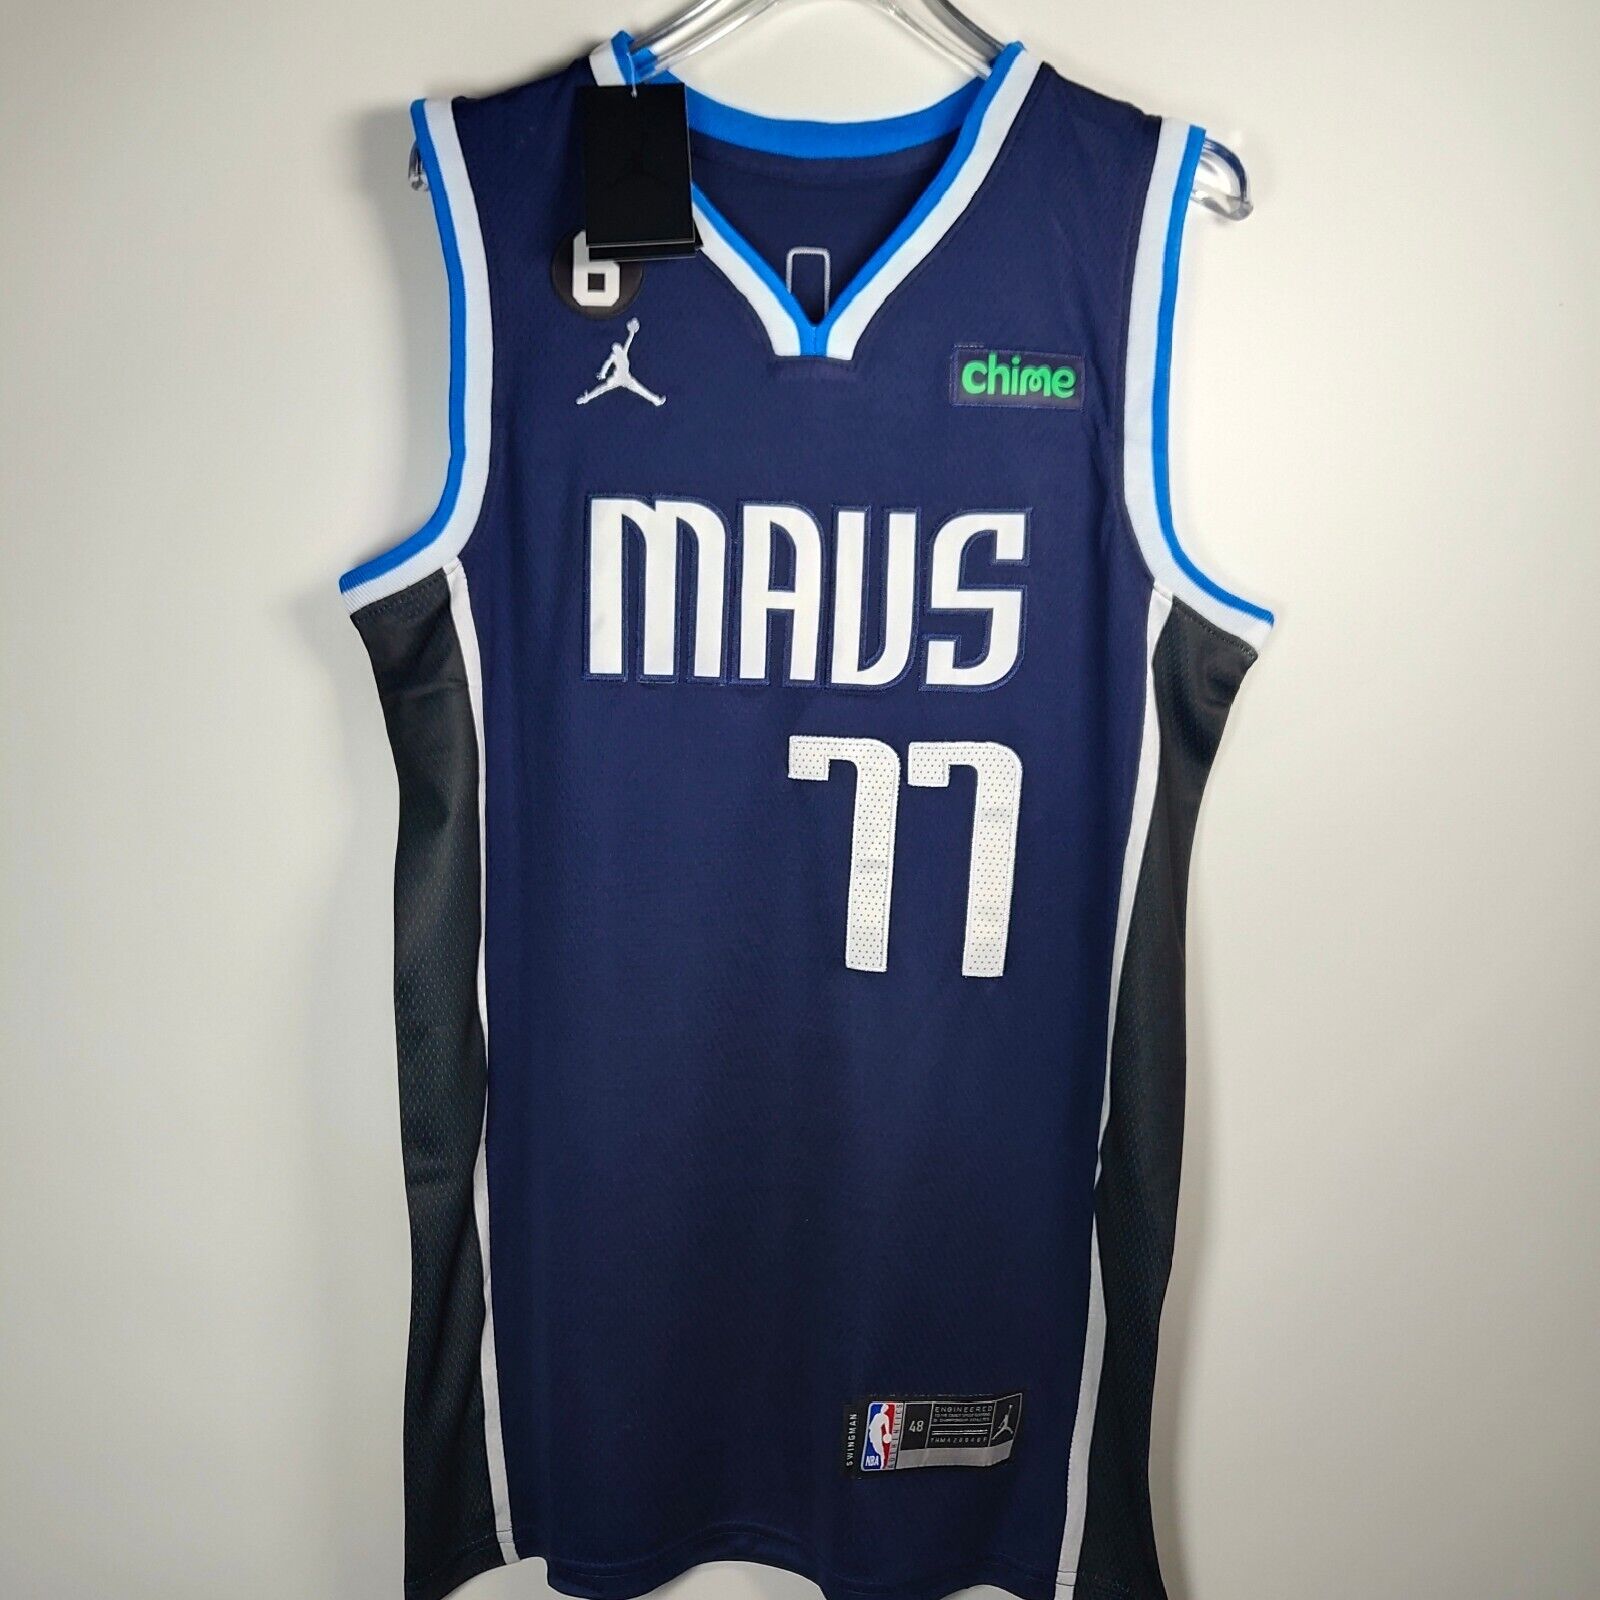 Luka Doncic #77 blue jersey embroidery